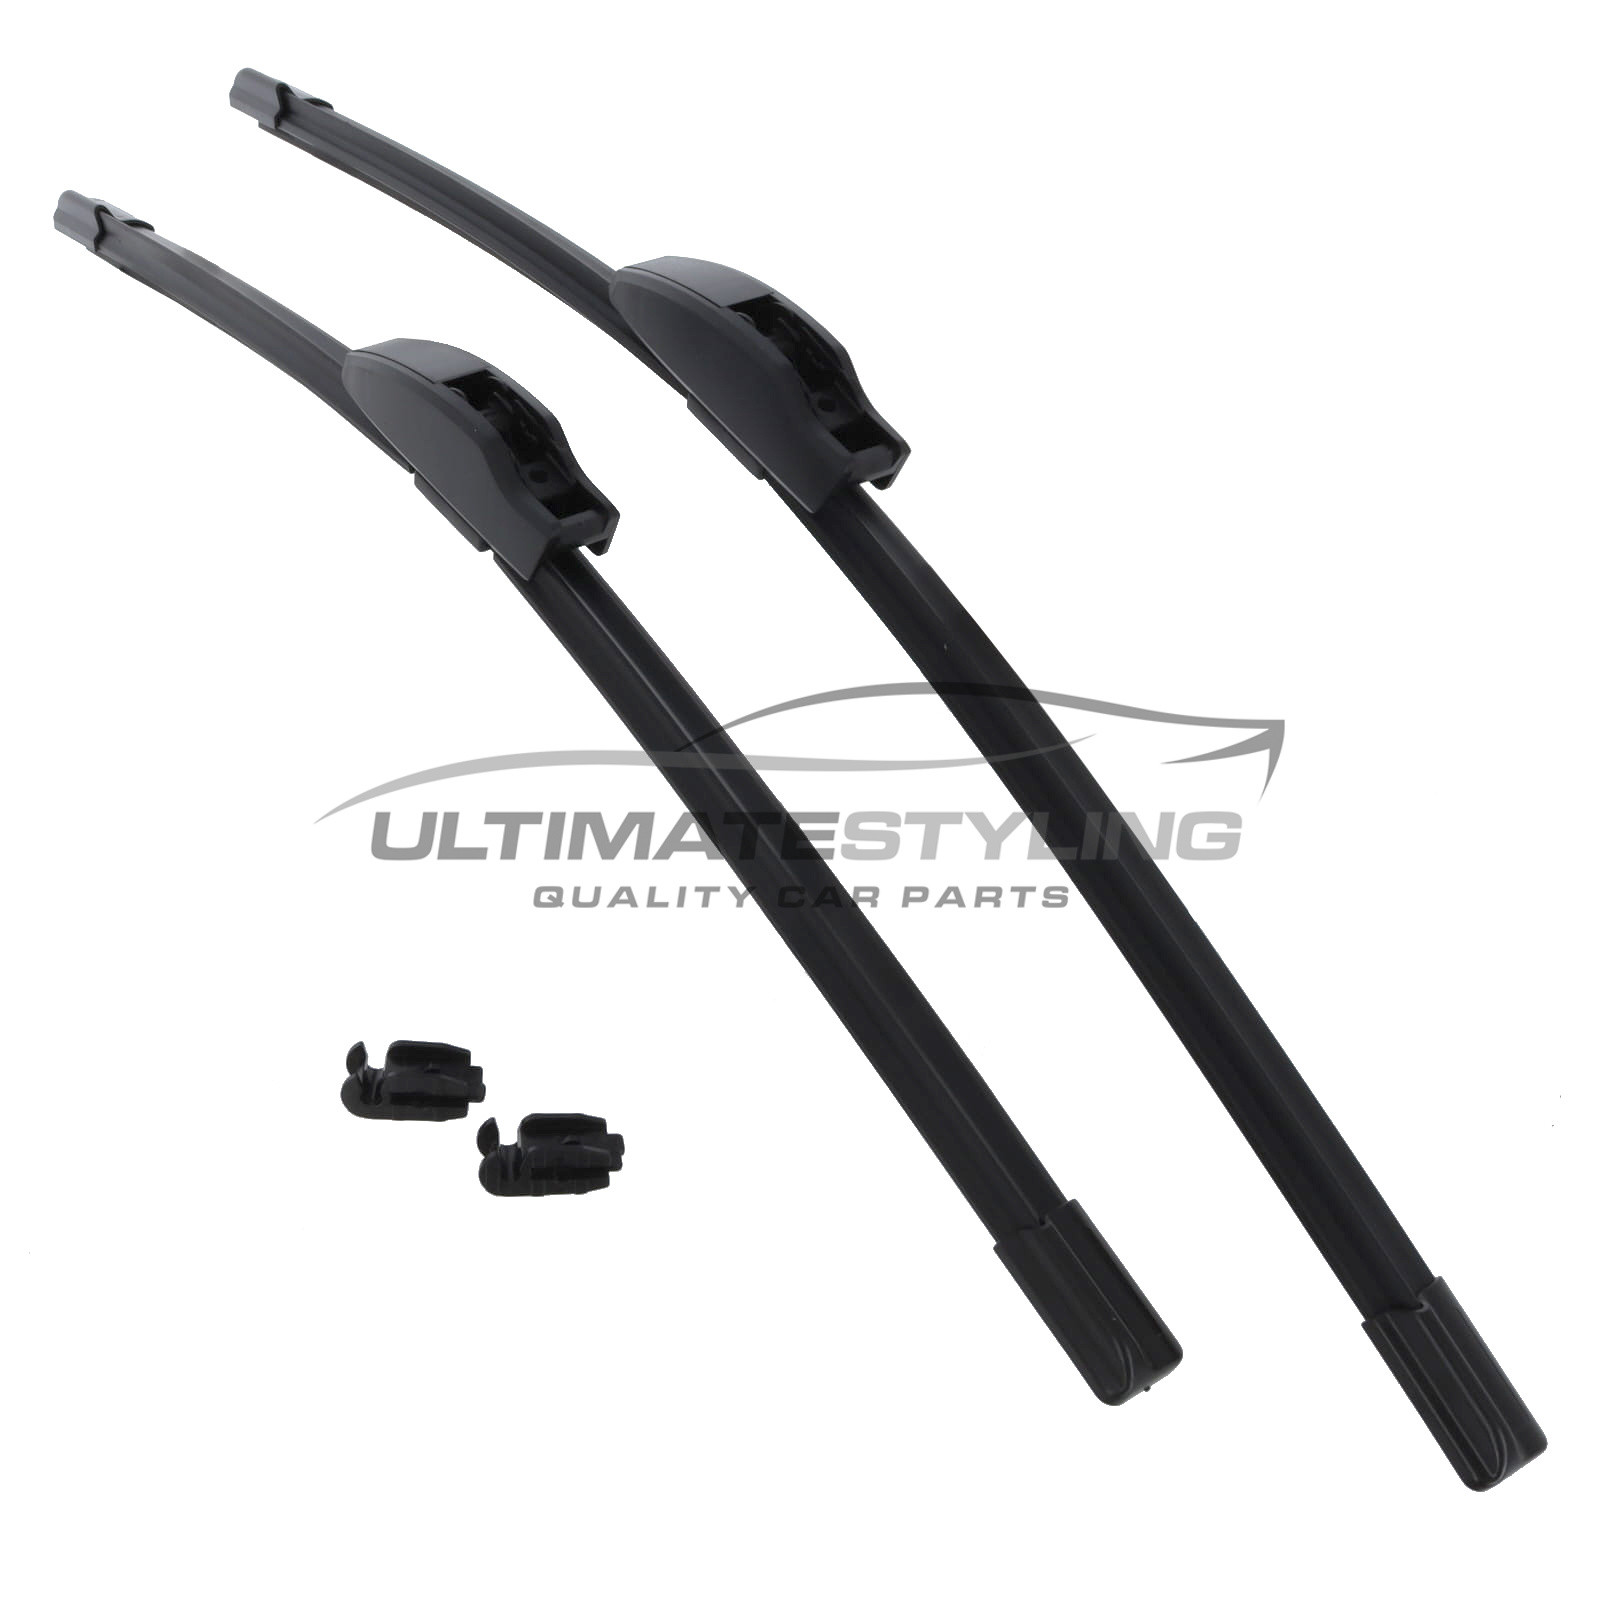 Drivers Side & Passenger Side (Front) Wiper Blades for Hyundai Accent